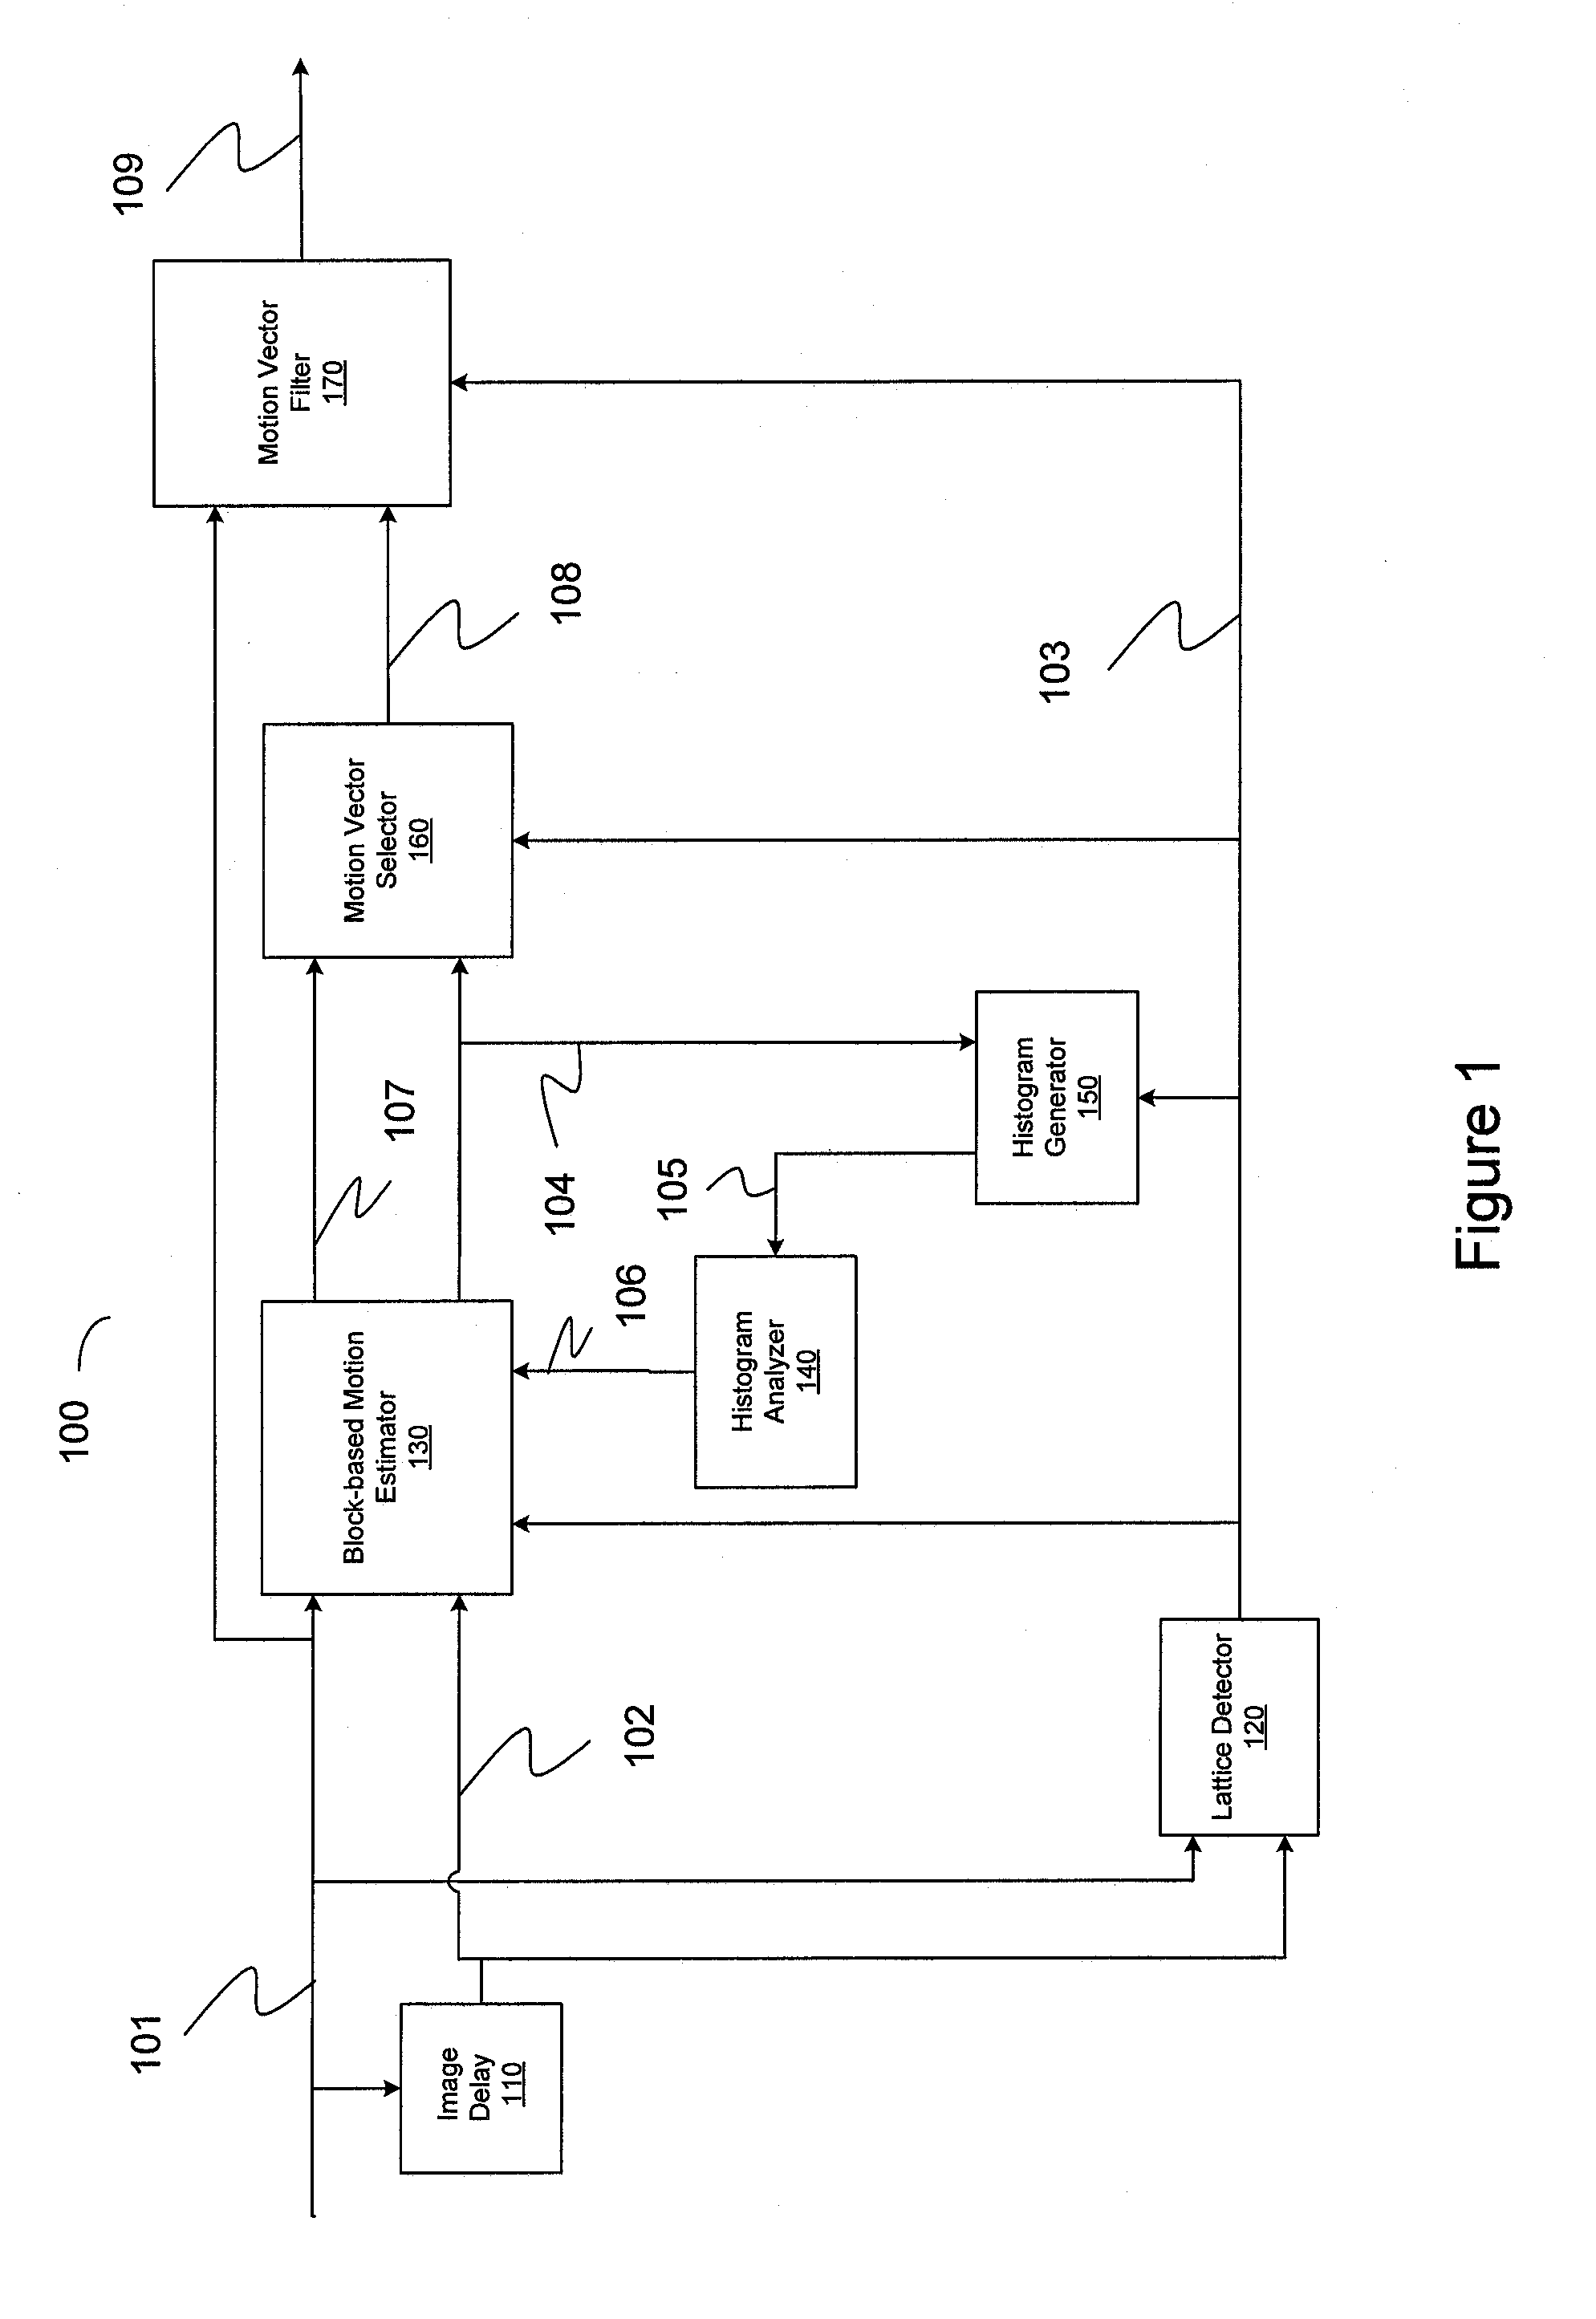 Apparatus and method for motion vector filtering based on local image segmentation and lattice maps